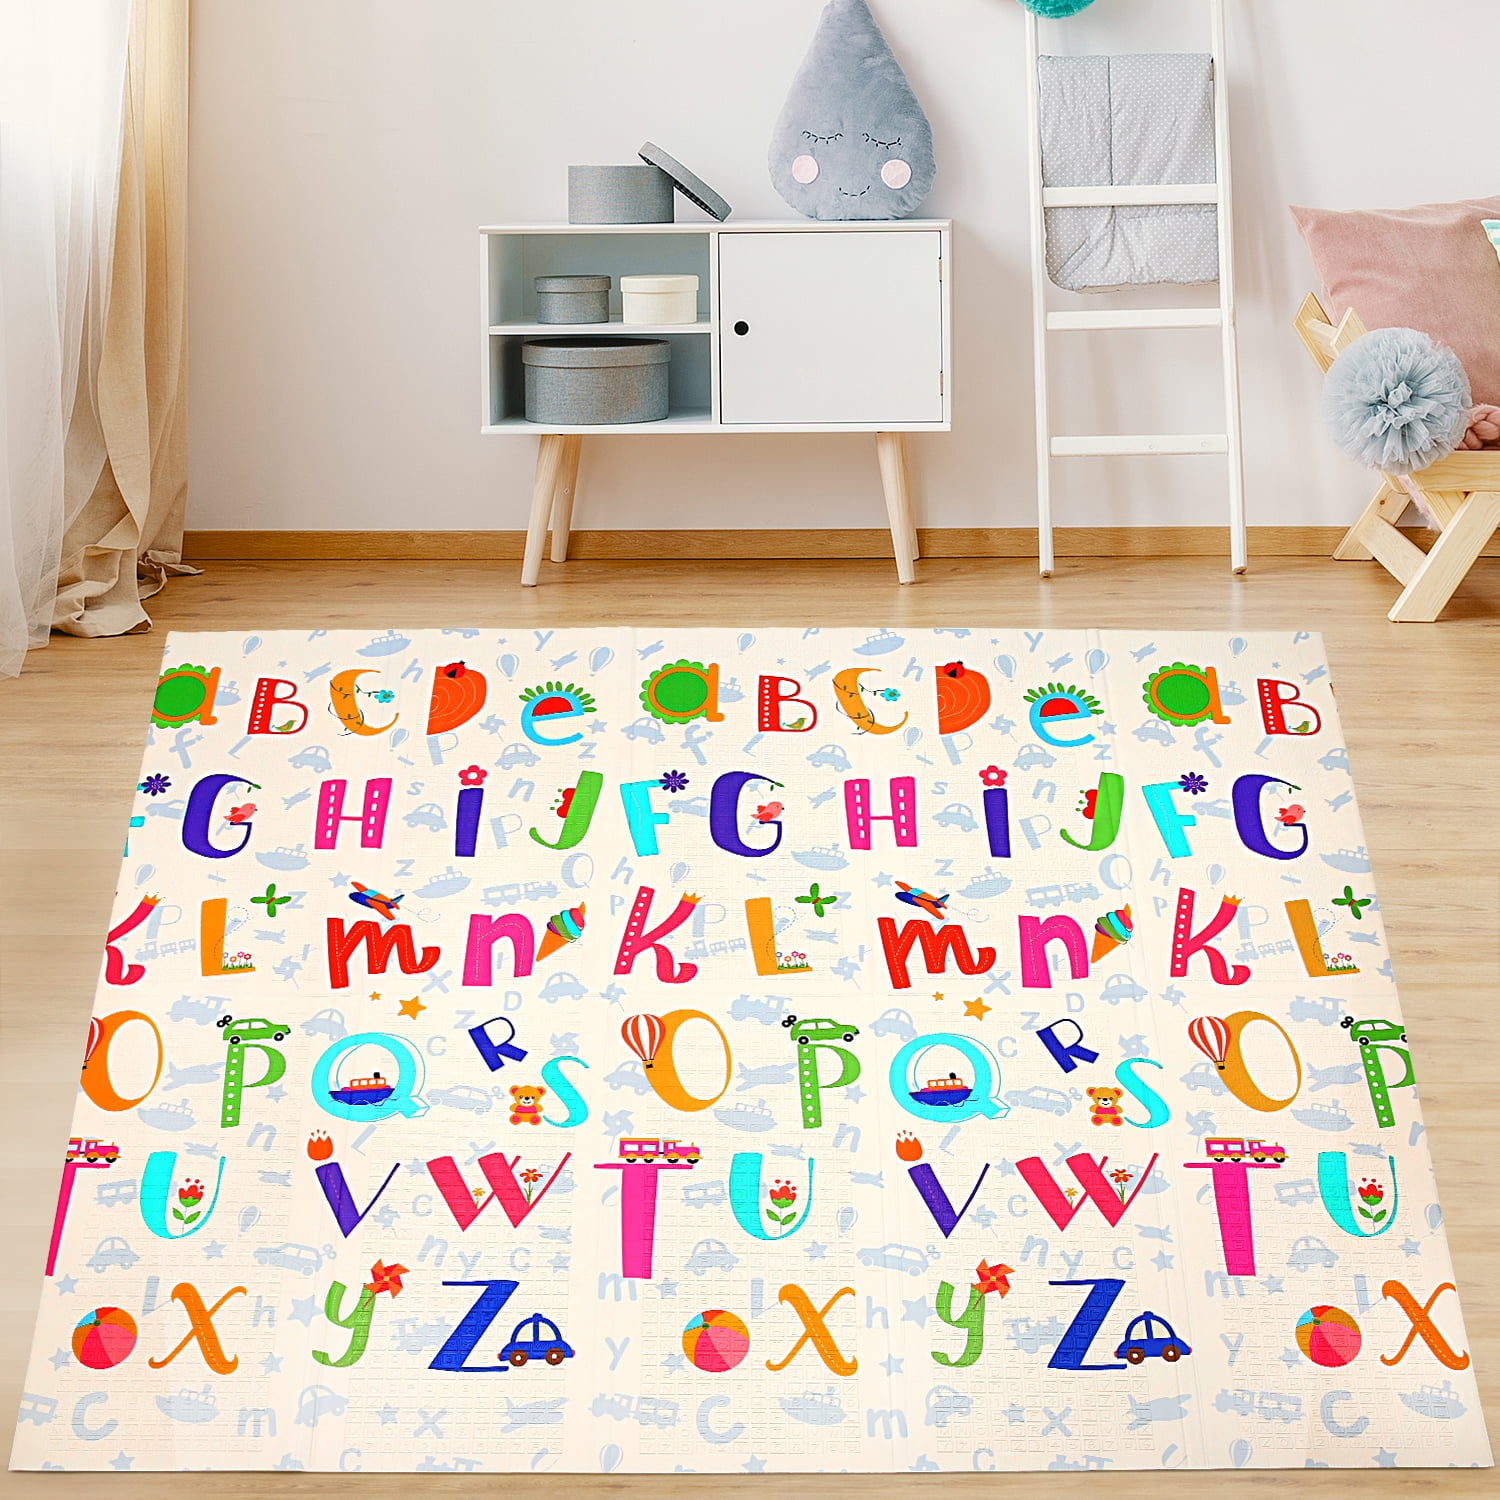 Baby Crawling Mat for Sale | Soft Baby Play Mat for Living Room, Dark Blue, 5'9x6'5(180x200cm)